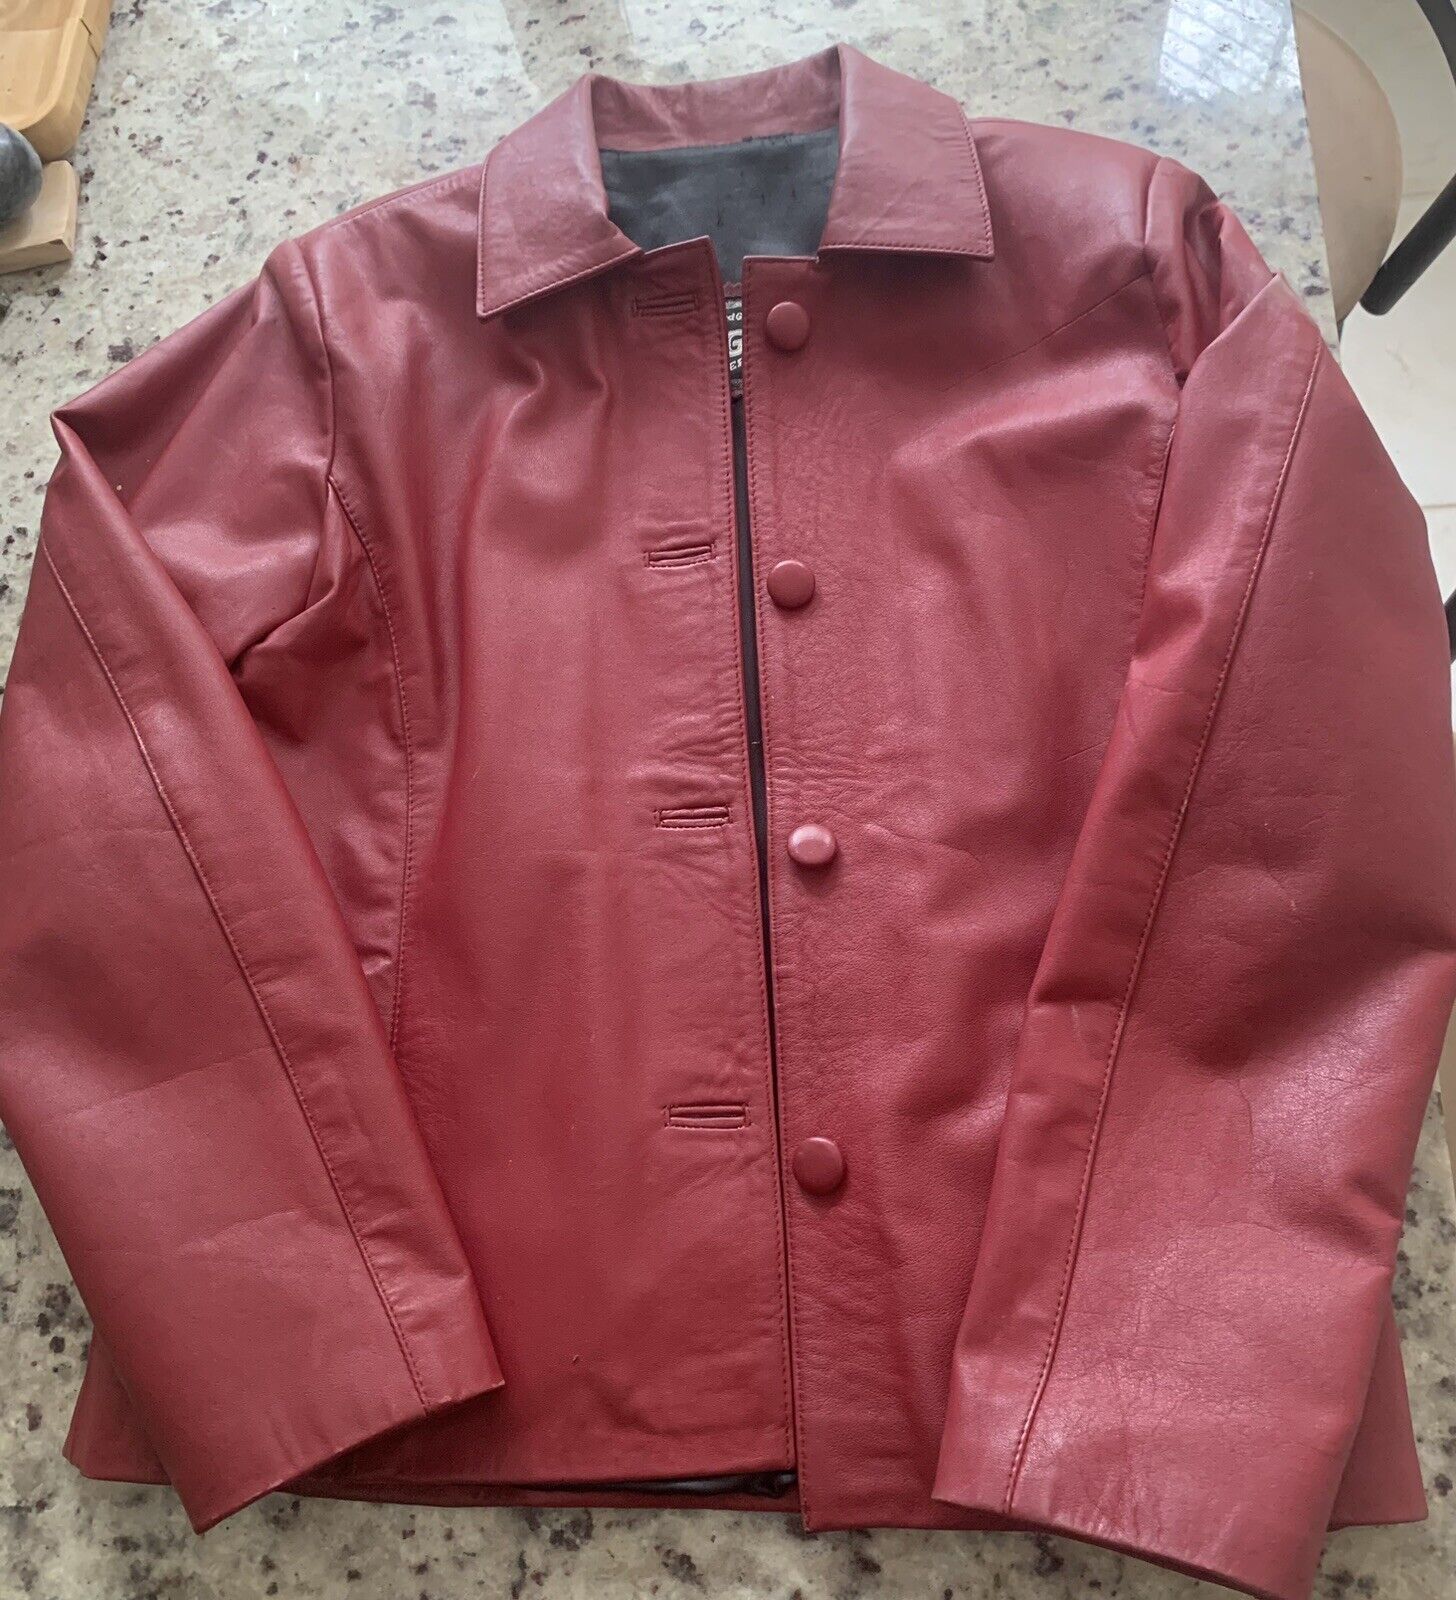 Vintage Red Genuine Leather Jacket Size Women’s Small, Argentina